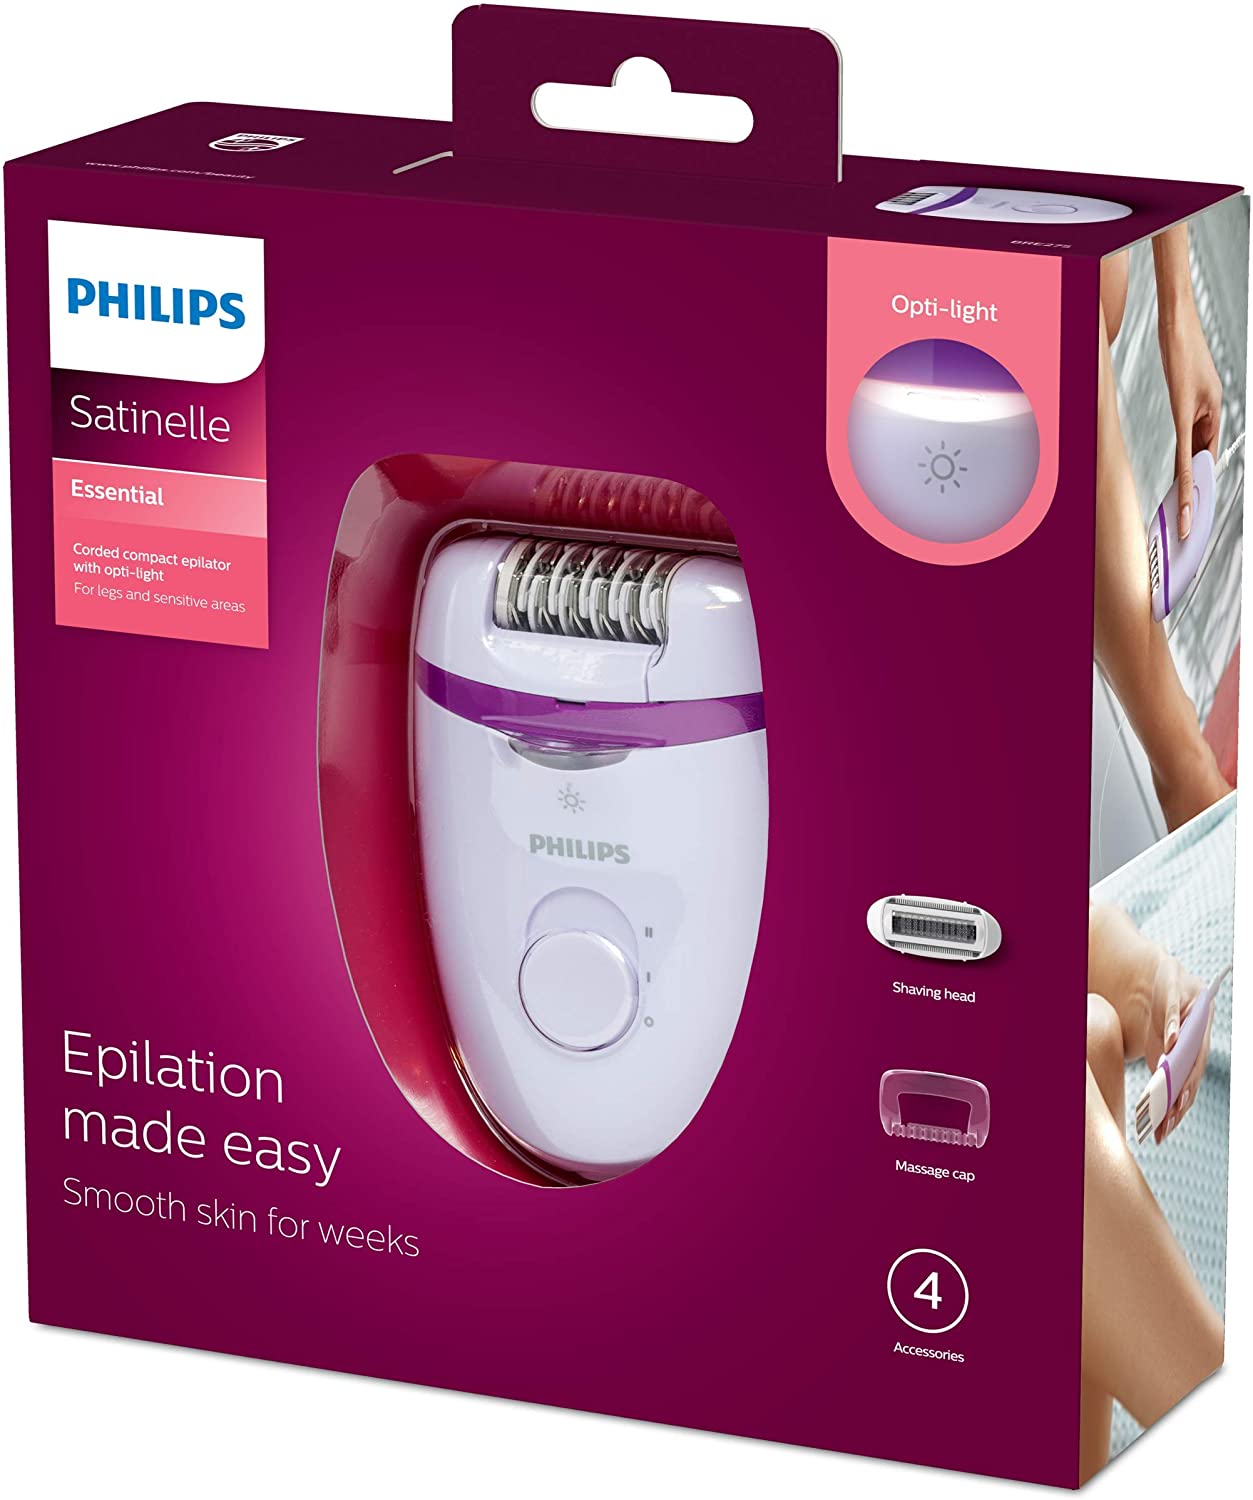 Philips Satinelle Essential Corded Compact Epilator. 4 Accessories. Opti- Light. 2 pin, White, BRE275